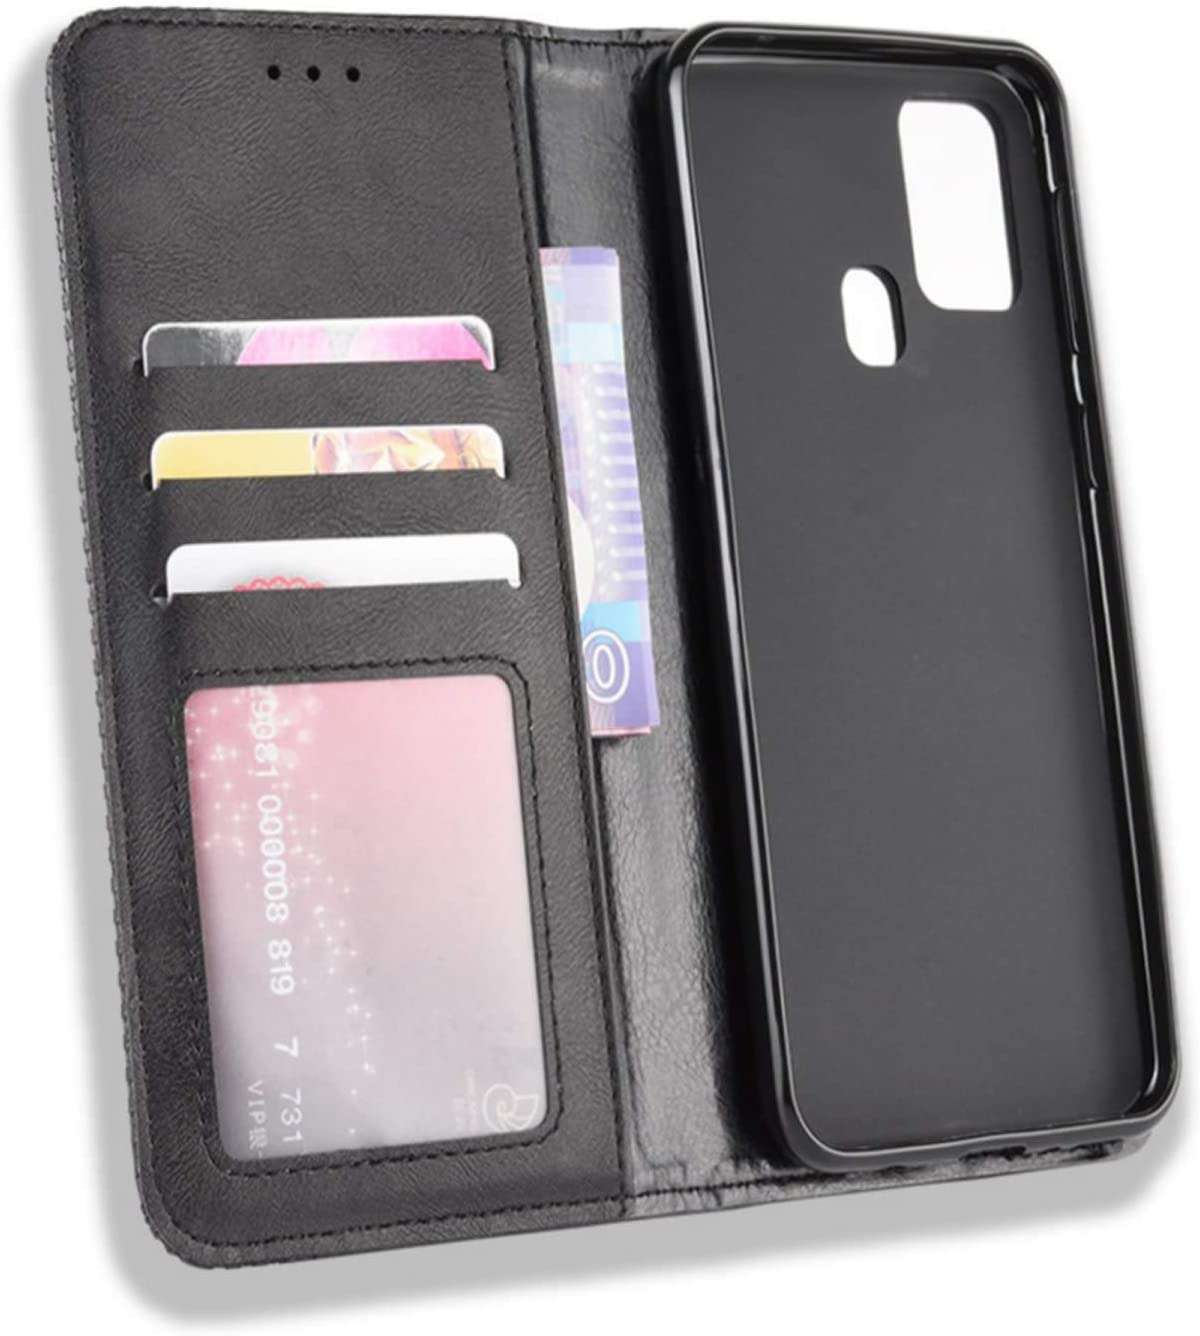 Samsung Galaxy M31 wallet flip cover case with soft tpu inner cover 